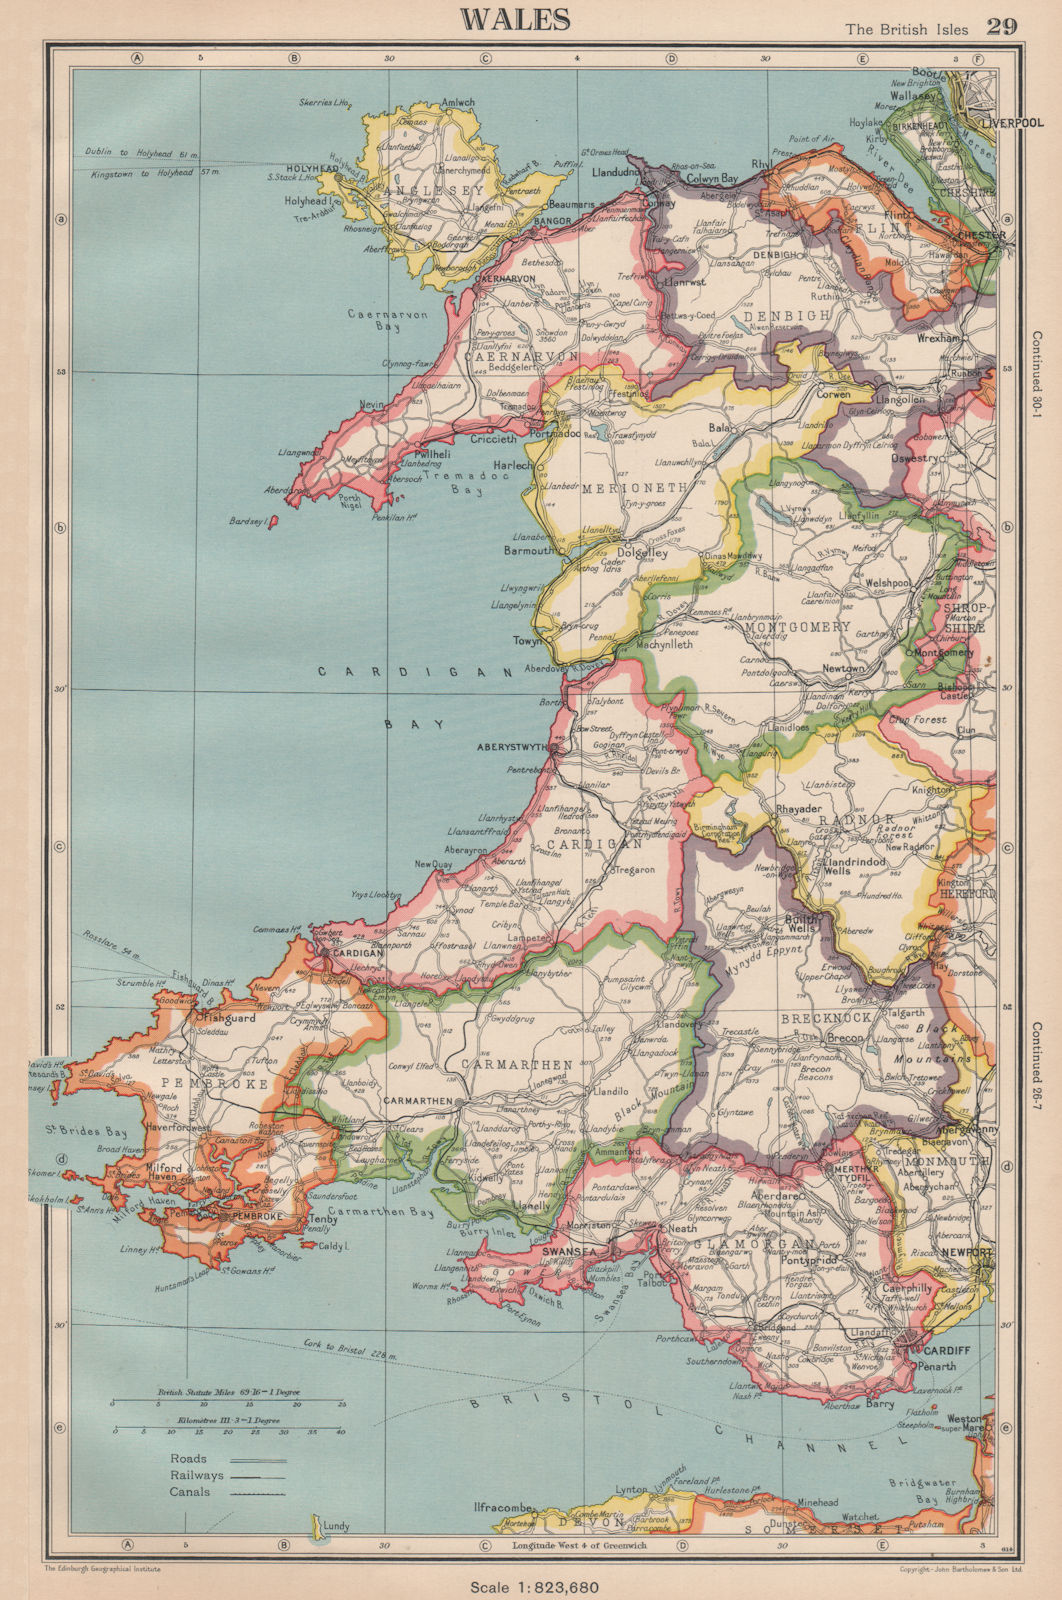 Associate Product WALES showing counties. BARTHOLOMEW 1944 old vintage map plan chart